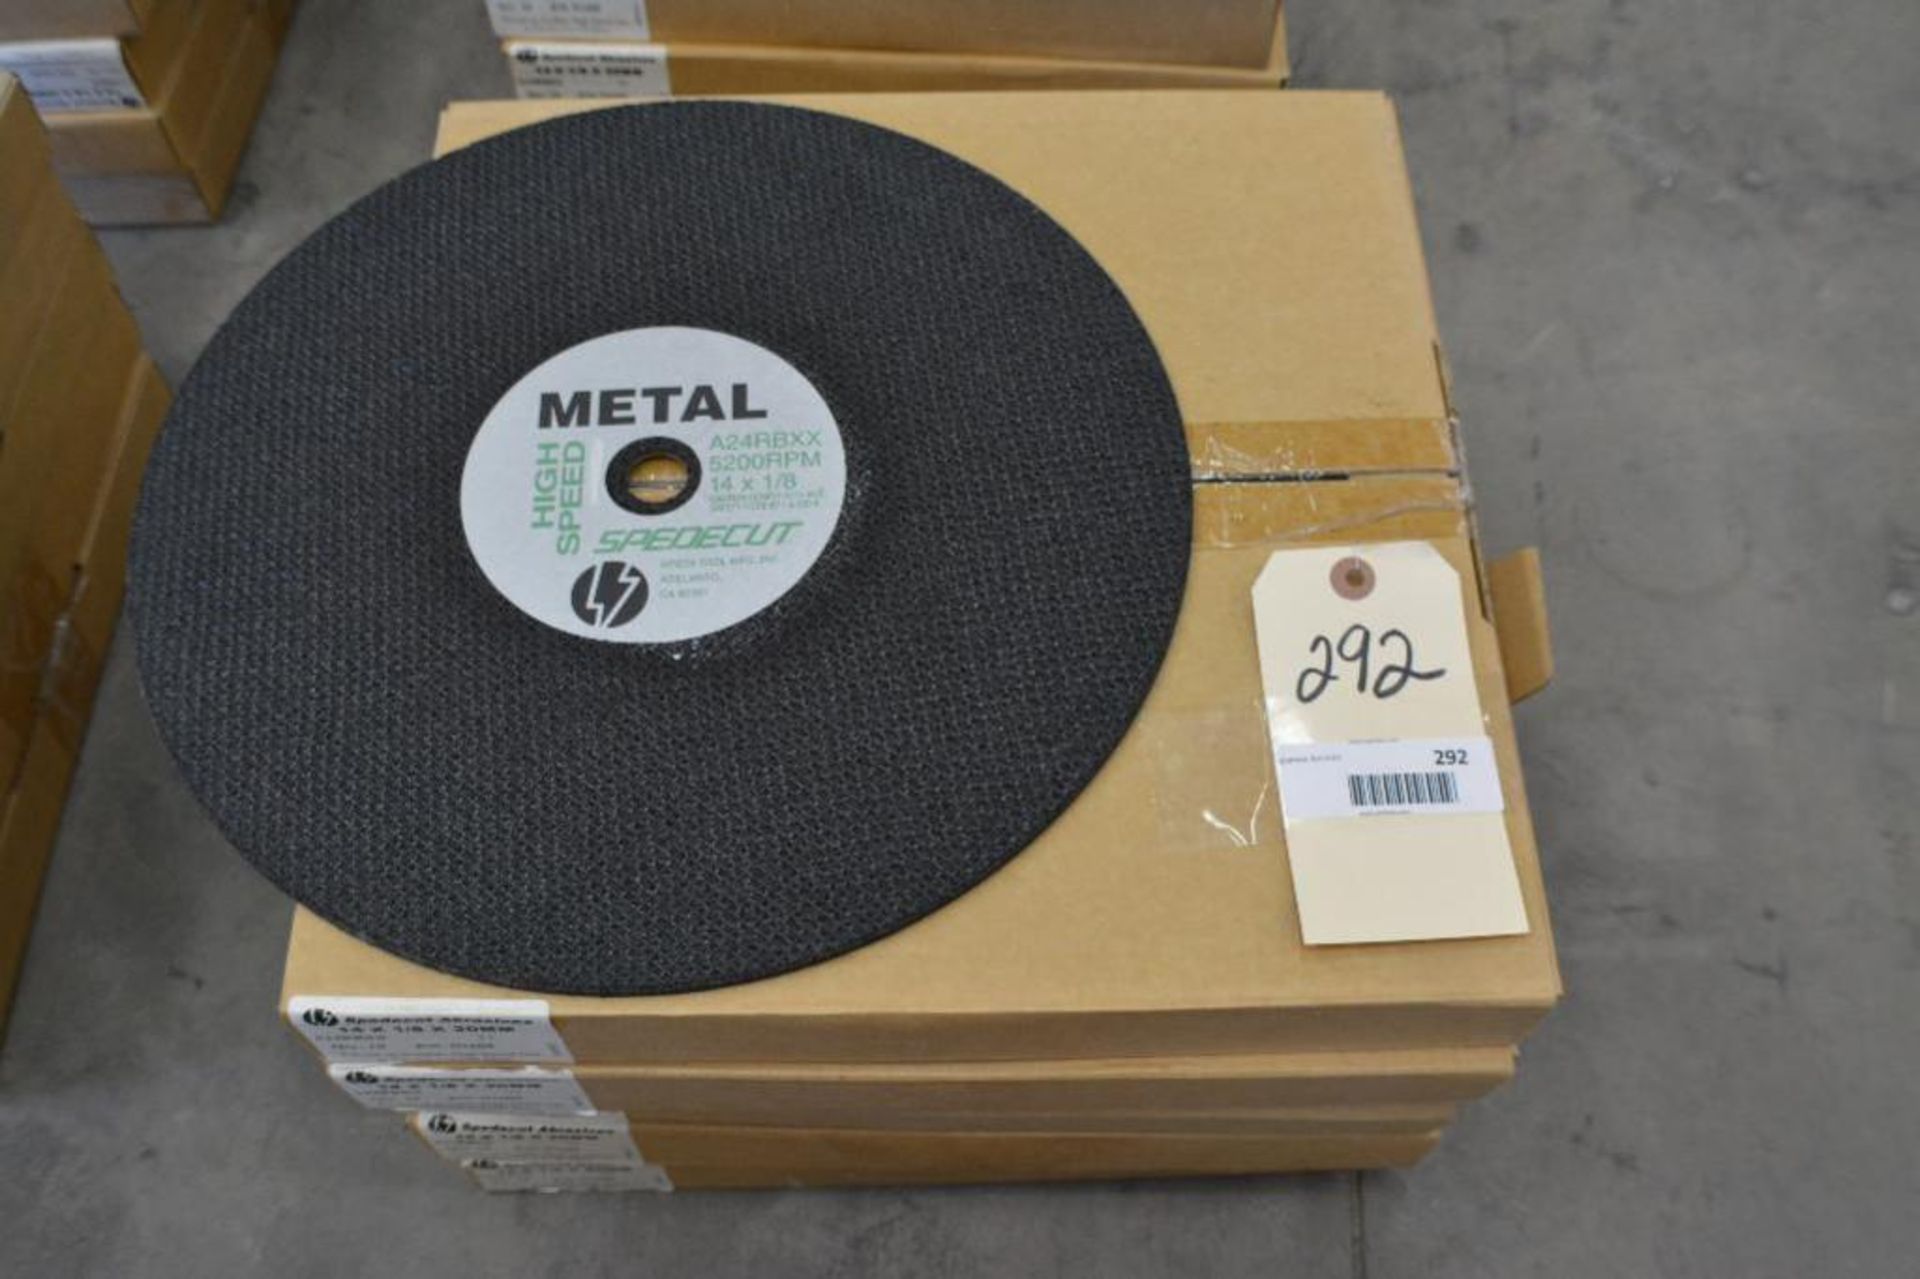 Speedcut Metal Cutting Disc. Size: 14 x 1/8 x 20mm Use on portable High Speed Gas or Electric Cut of